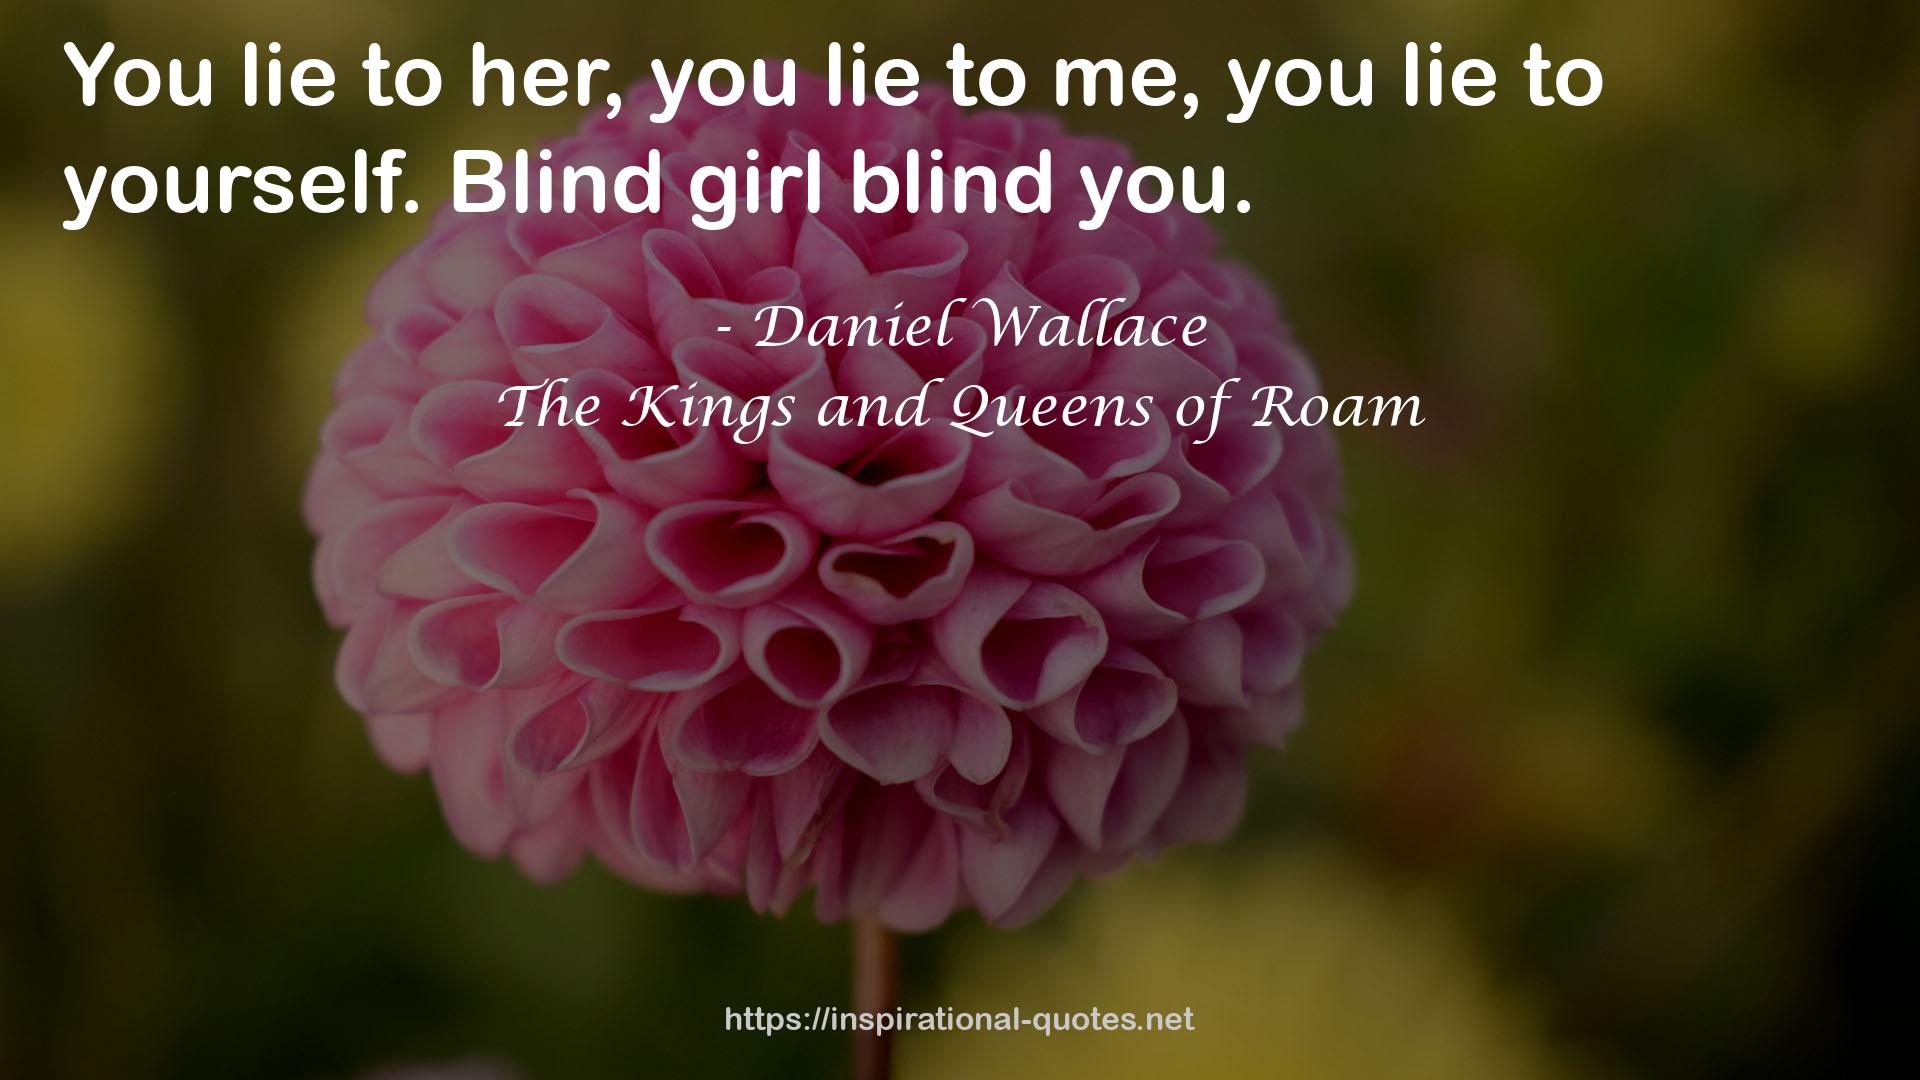 The Kings and Queens of Roam QUOTES